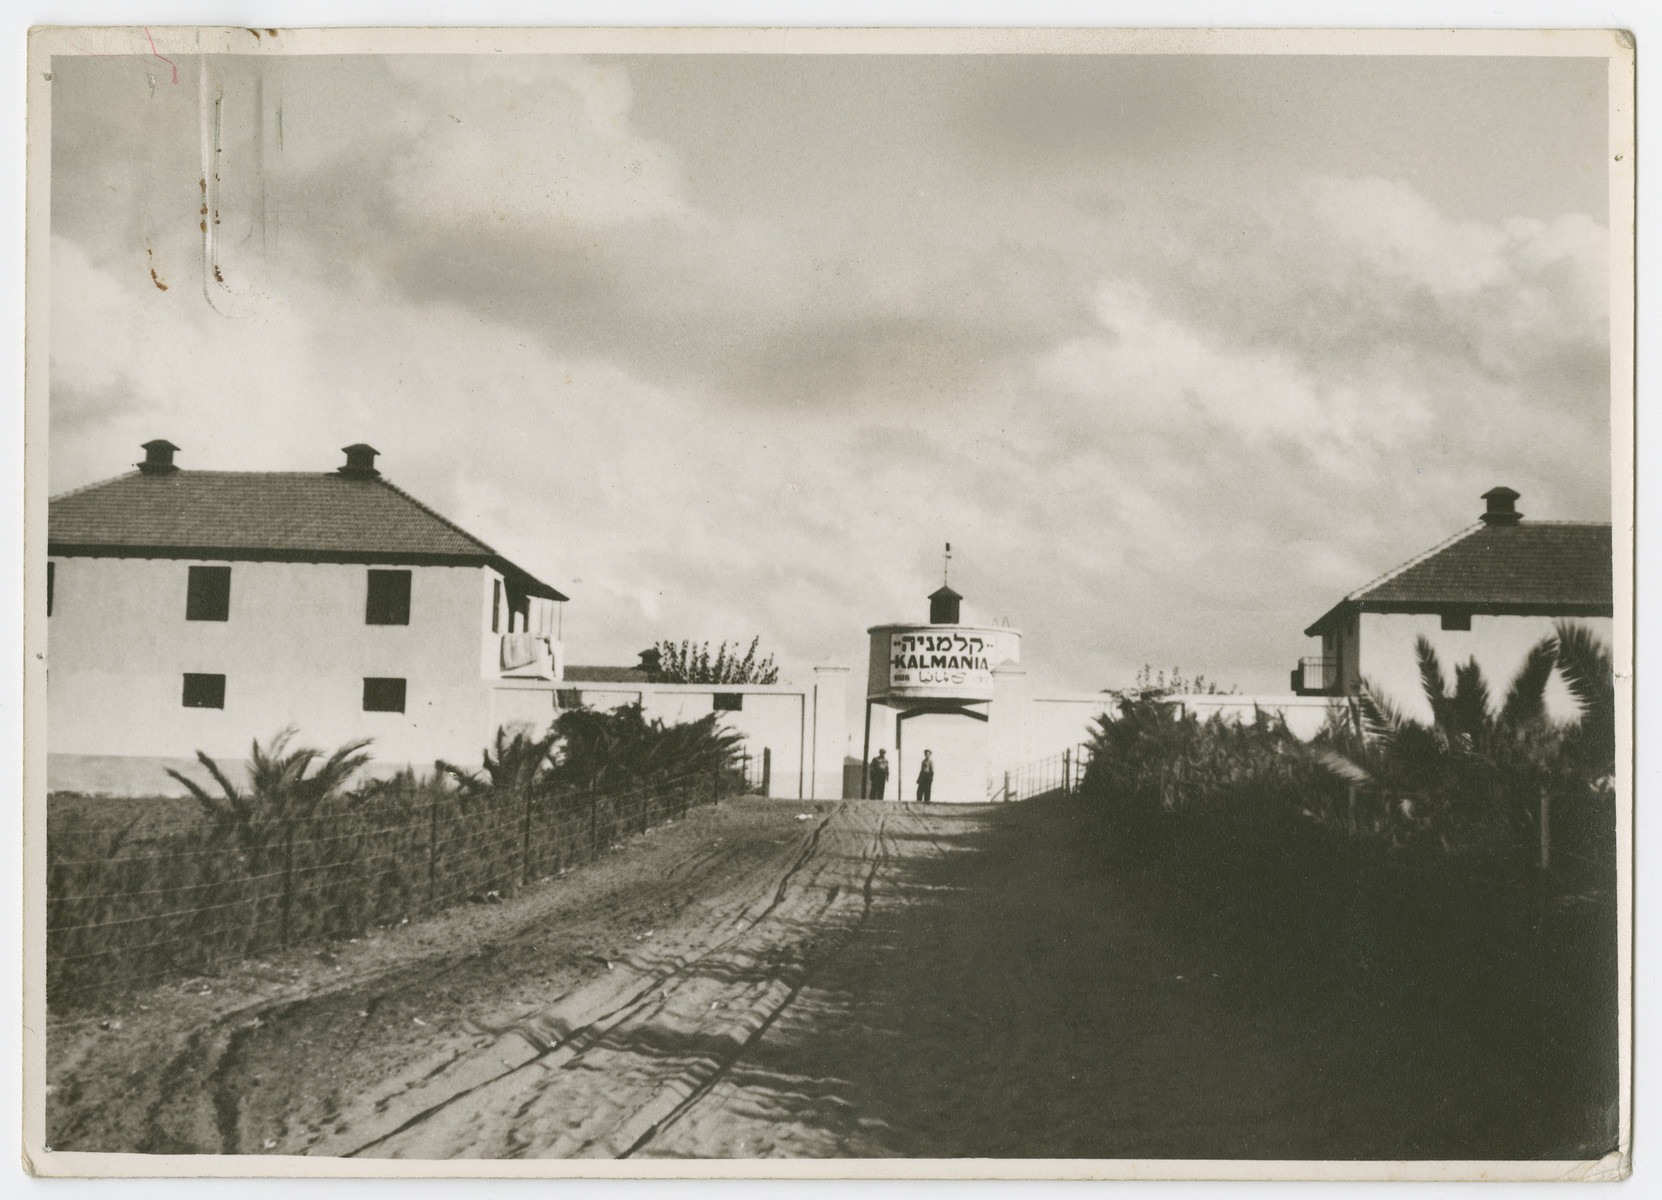 View of the Jewish settlement of Kalmania.

Photograph is used on page 240 of Robert Gessner's "Some of My Best Friends are Jews." The pencil inscription on the back of the photograph reads, "Homes built as Forts as protection."